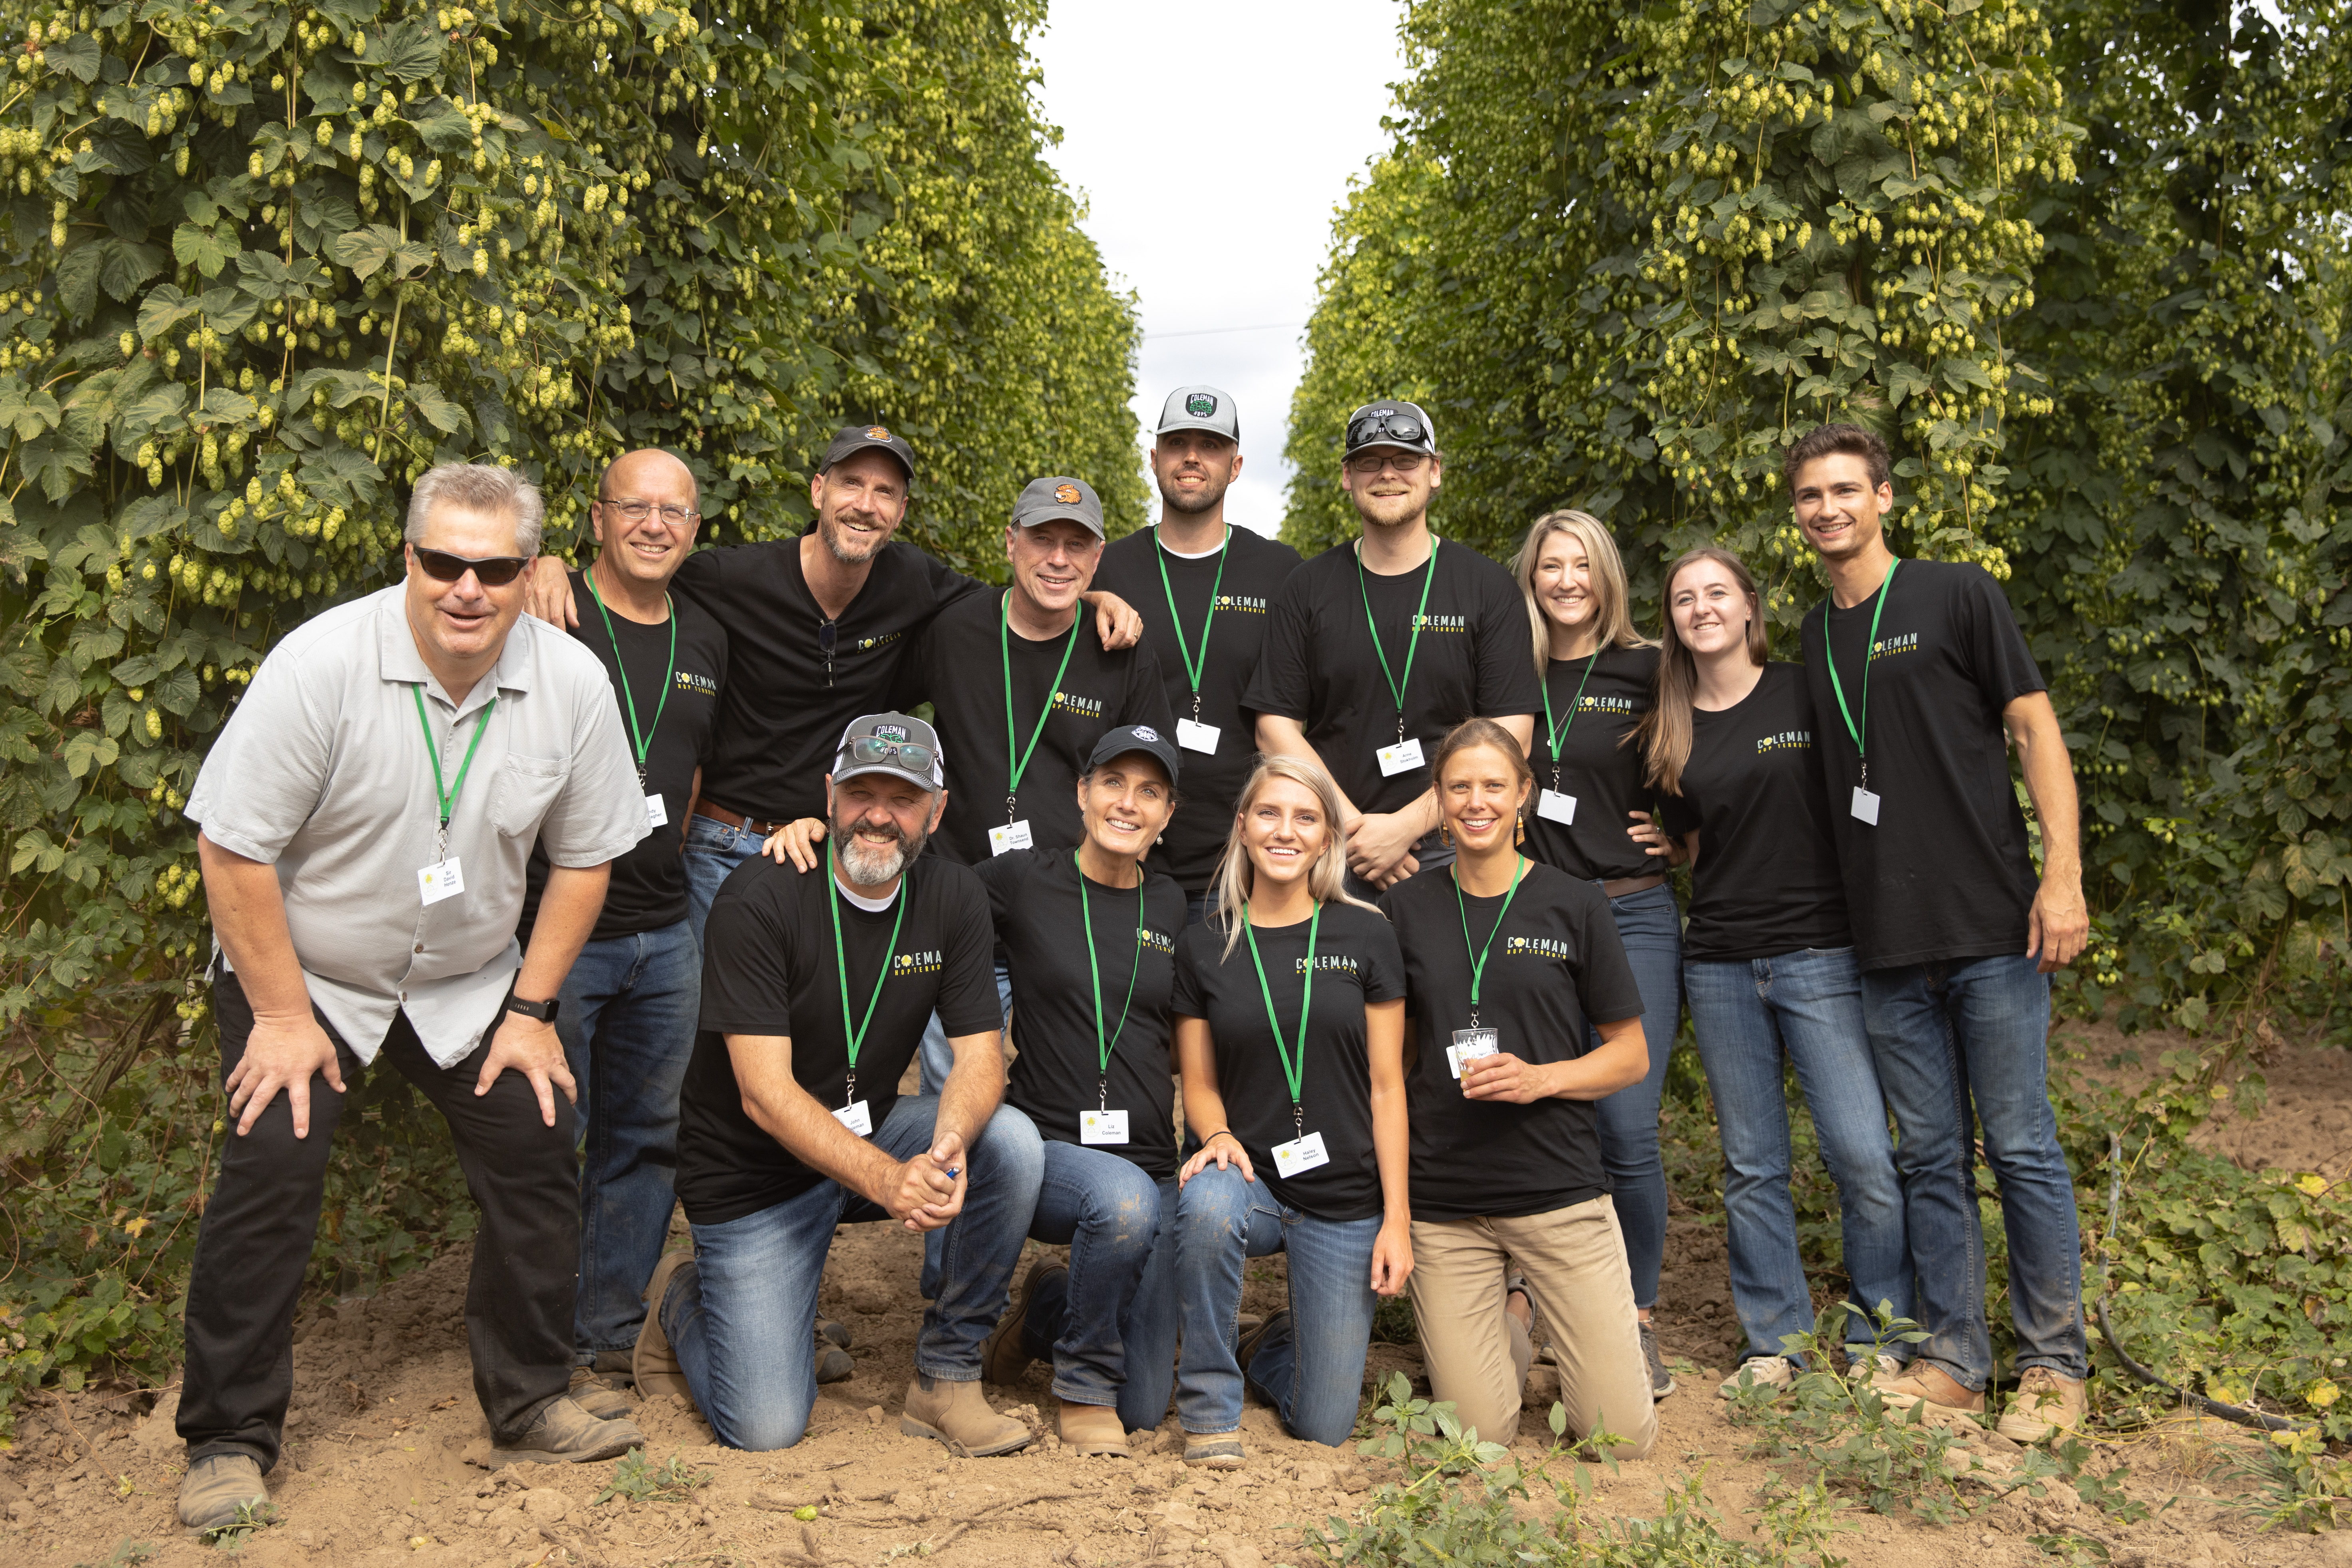 The Hop Terroir team of Coleman Agriculture, Oregon State University and Red Hills Soils. (image courtesy of Coleman Agriculture)